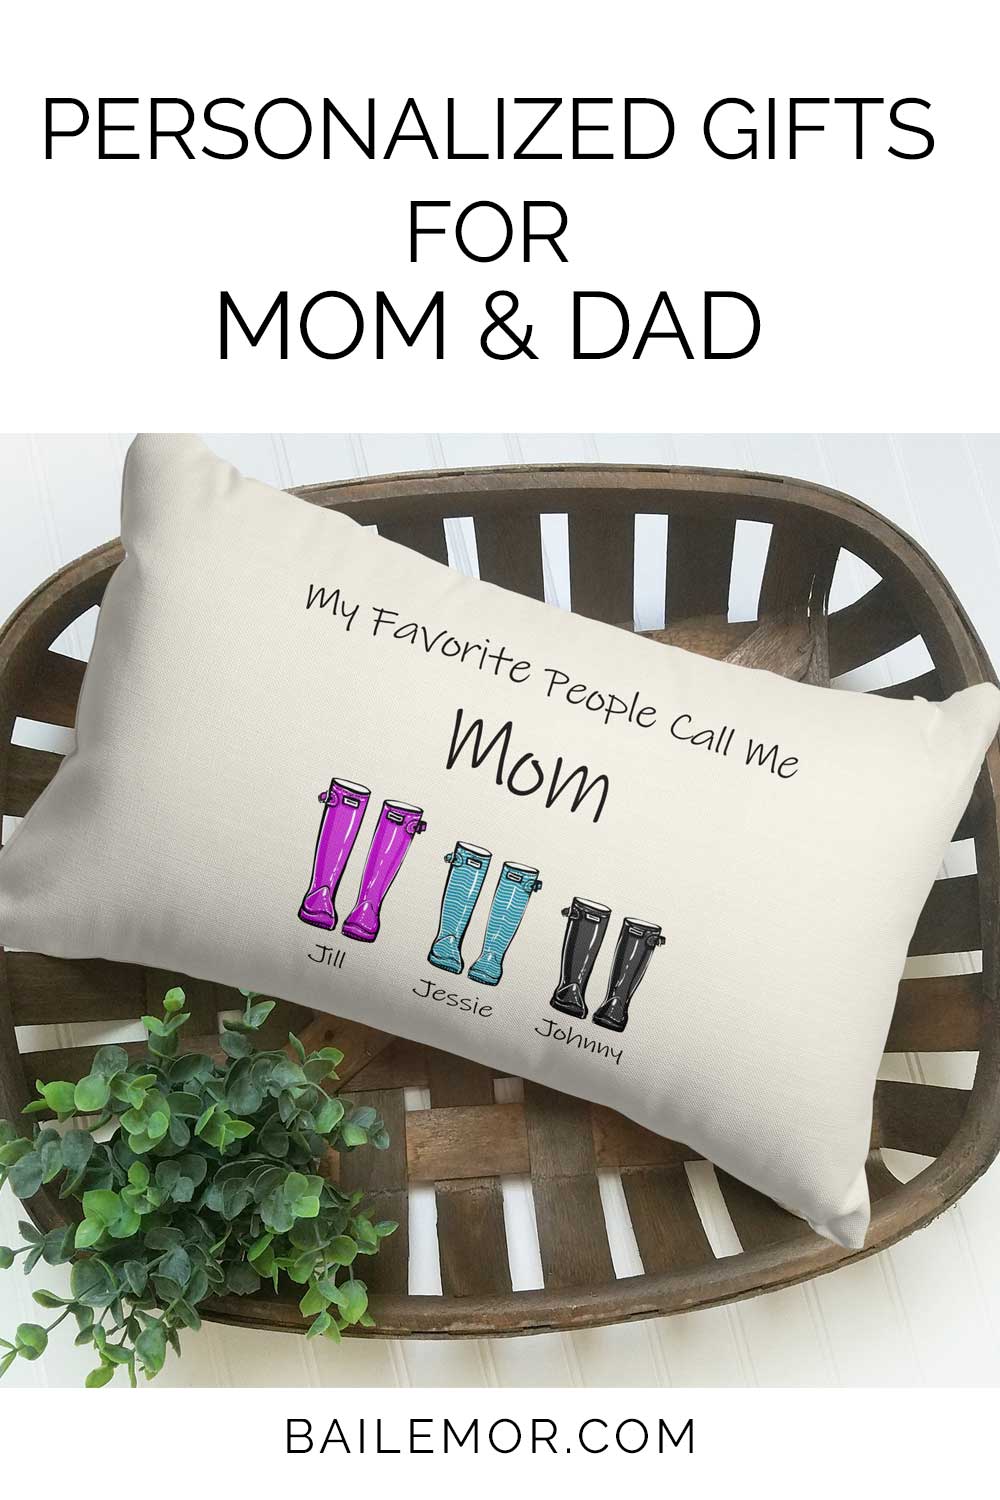 https://bailemor.com/wp-content/uploads/2021/03/personalized-gifts-for-mom-and-dad.jpg